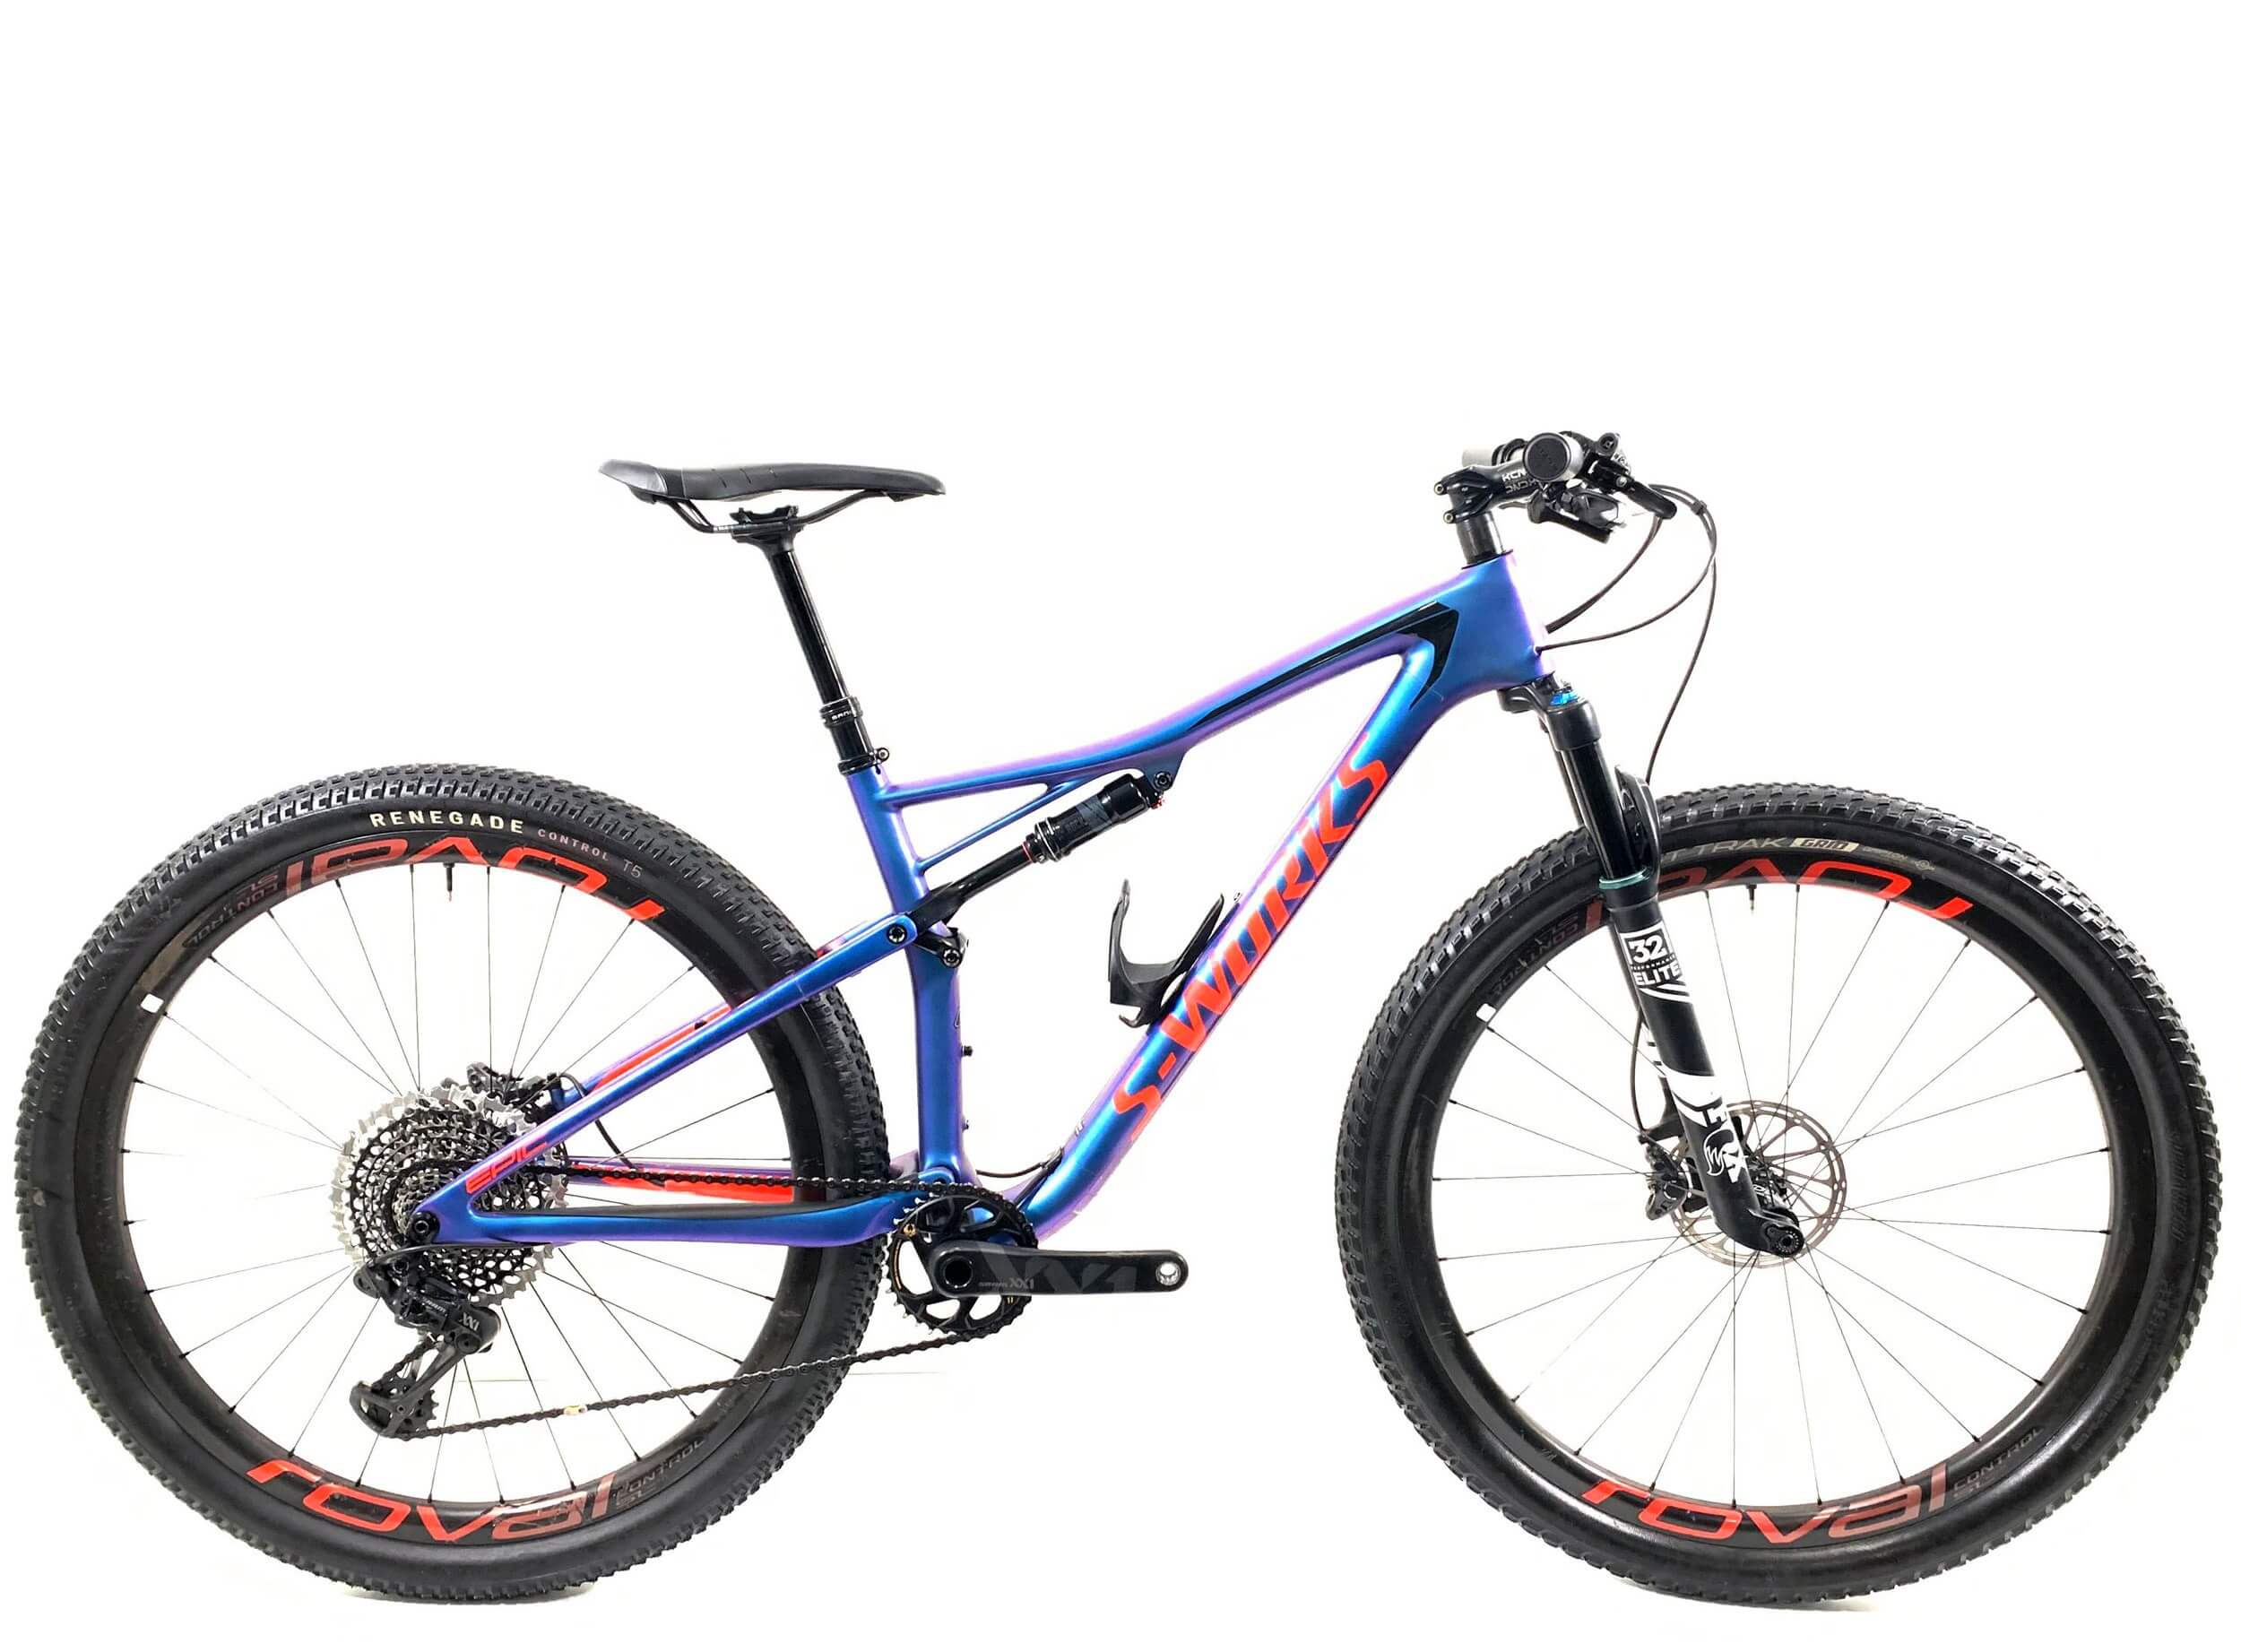 Specialized FSR S-Works brugt m | buycycle